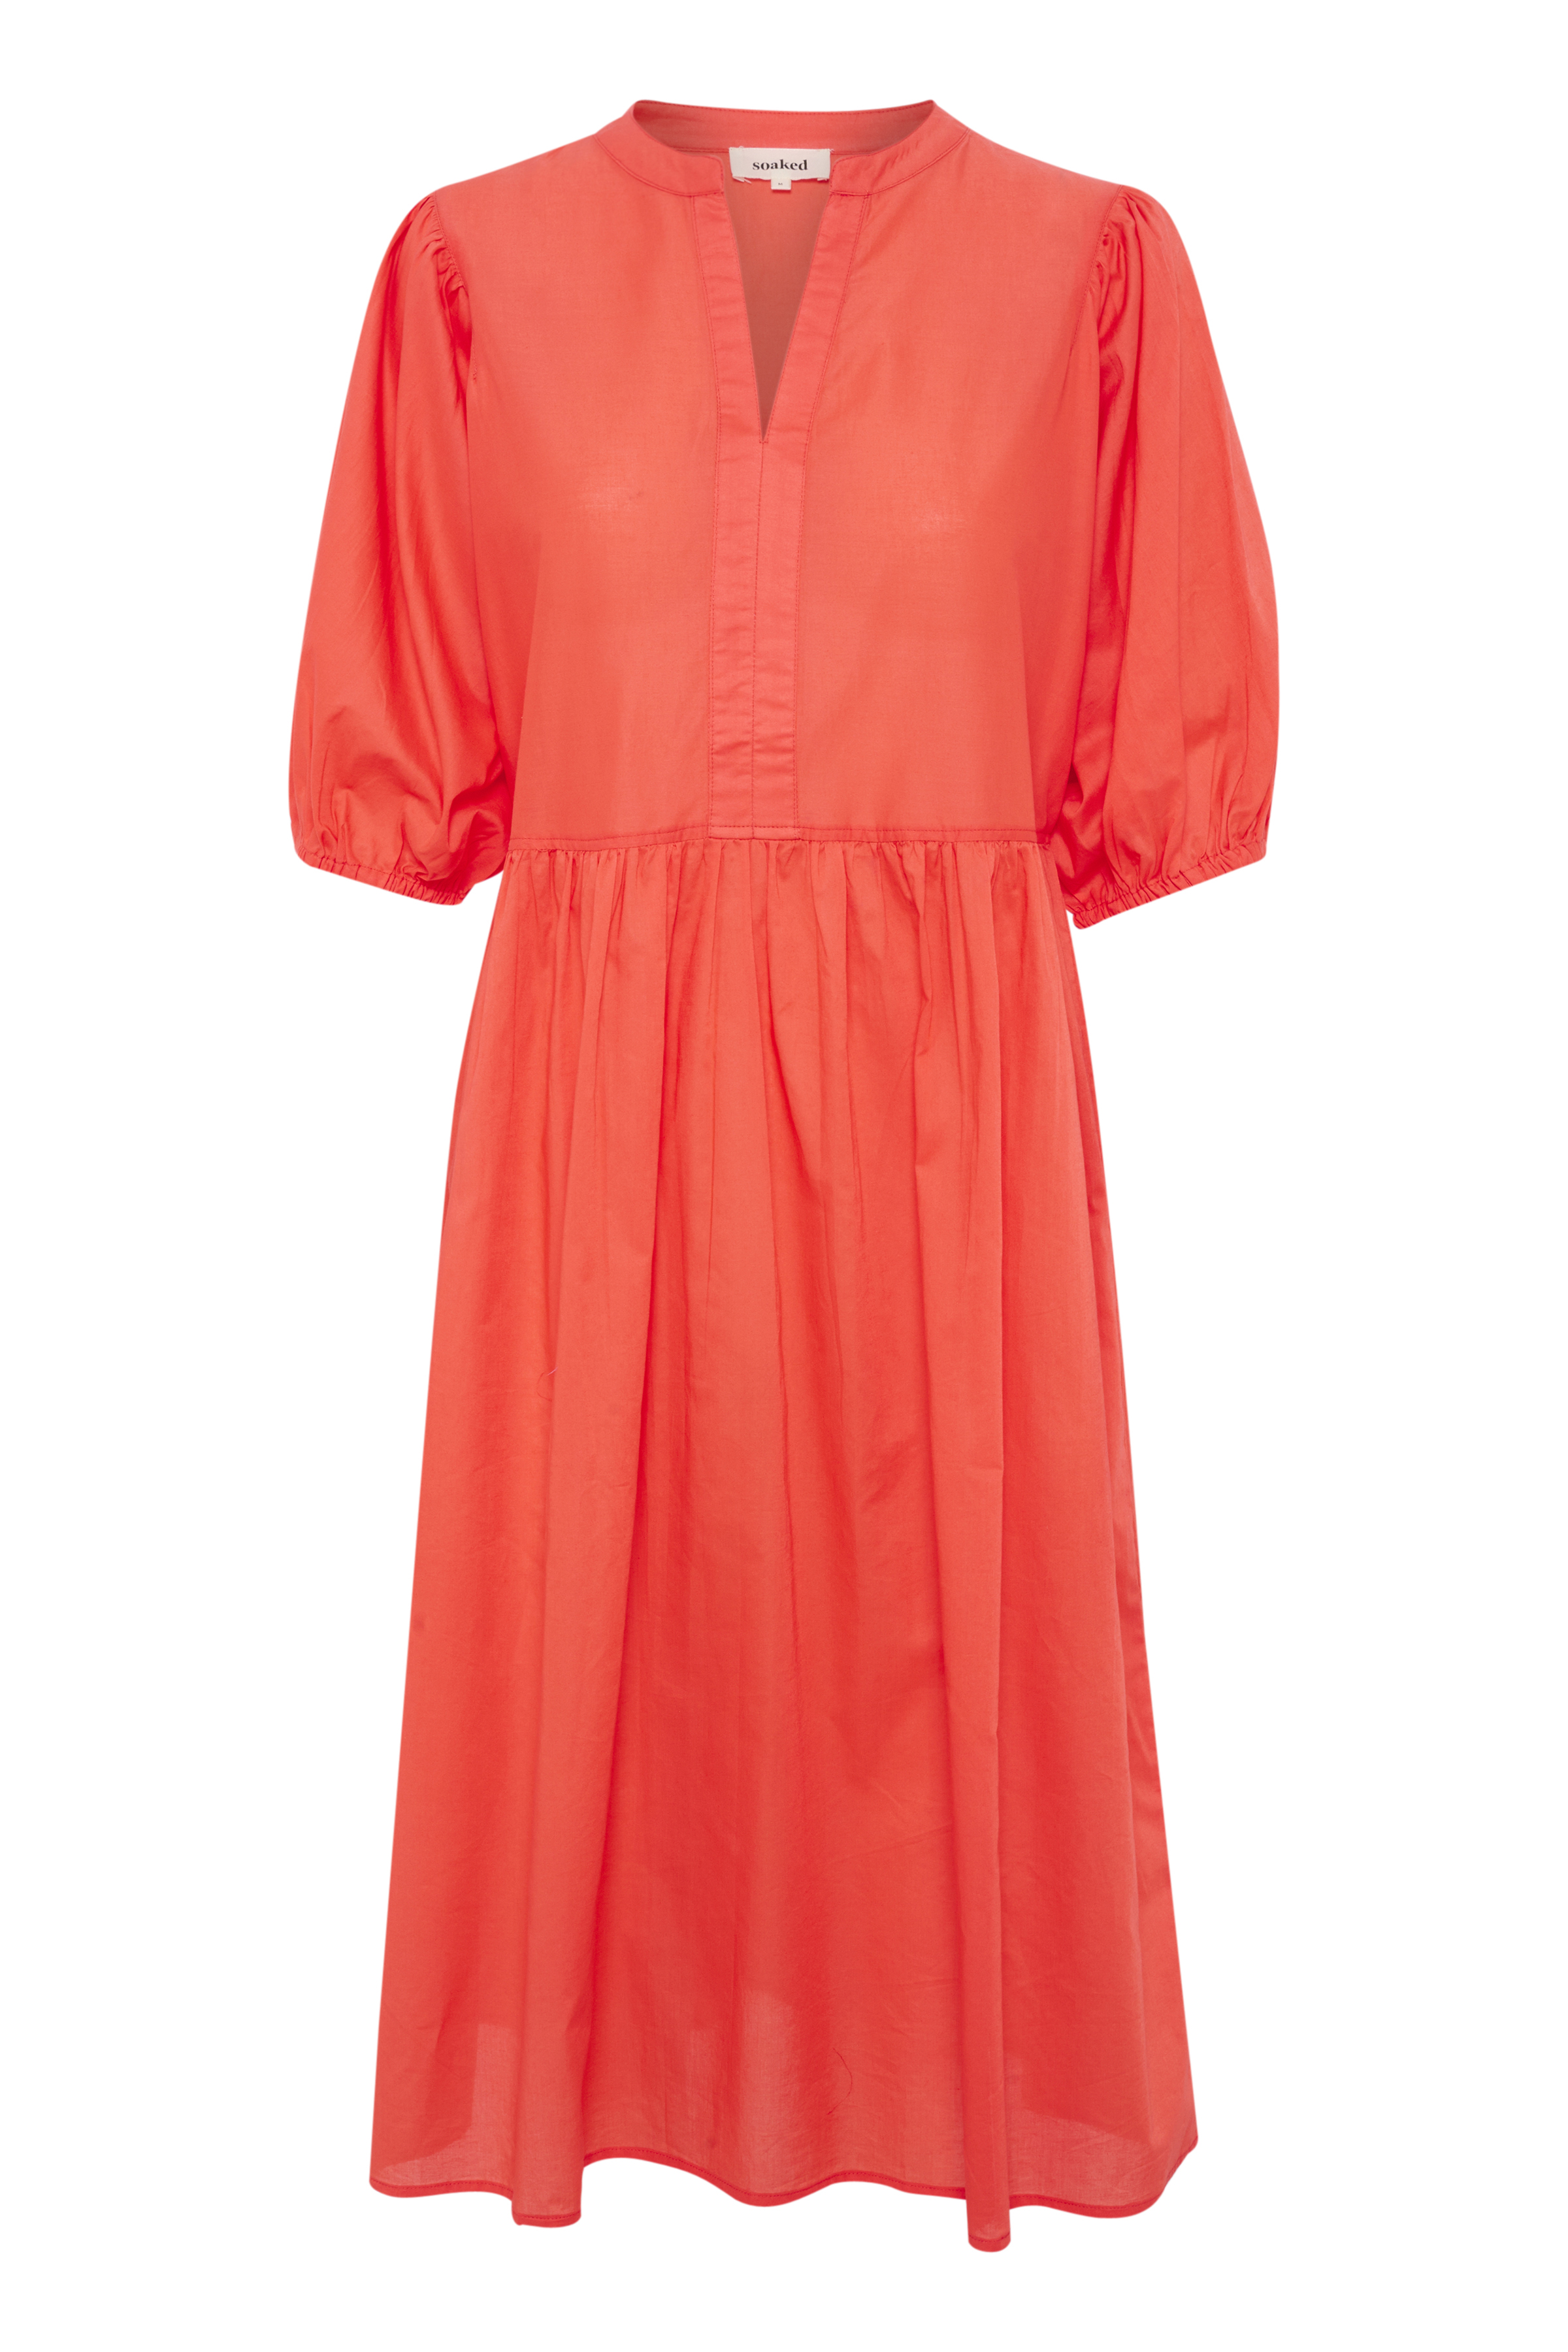 Soaked in Luxury  Hot Coral Josie Dress